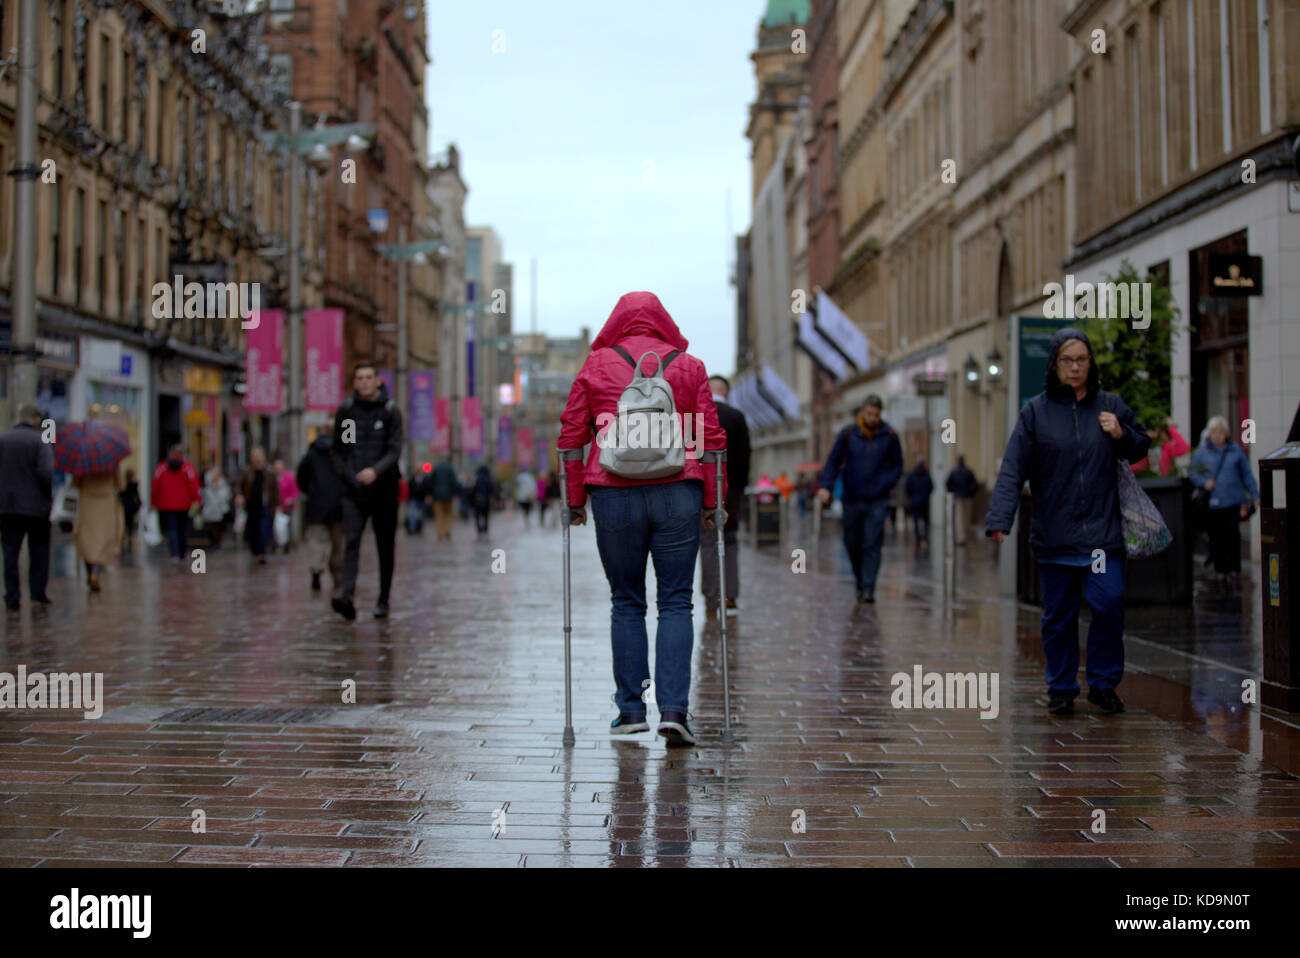 girl with walking sticks on Buchanan street Glasgow in perspective from behind crutches walking aids Stock Photo